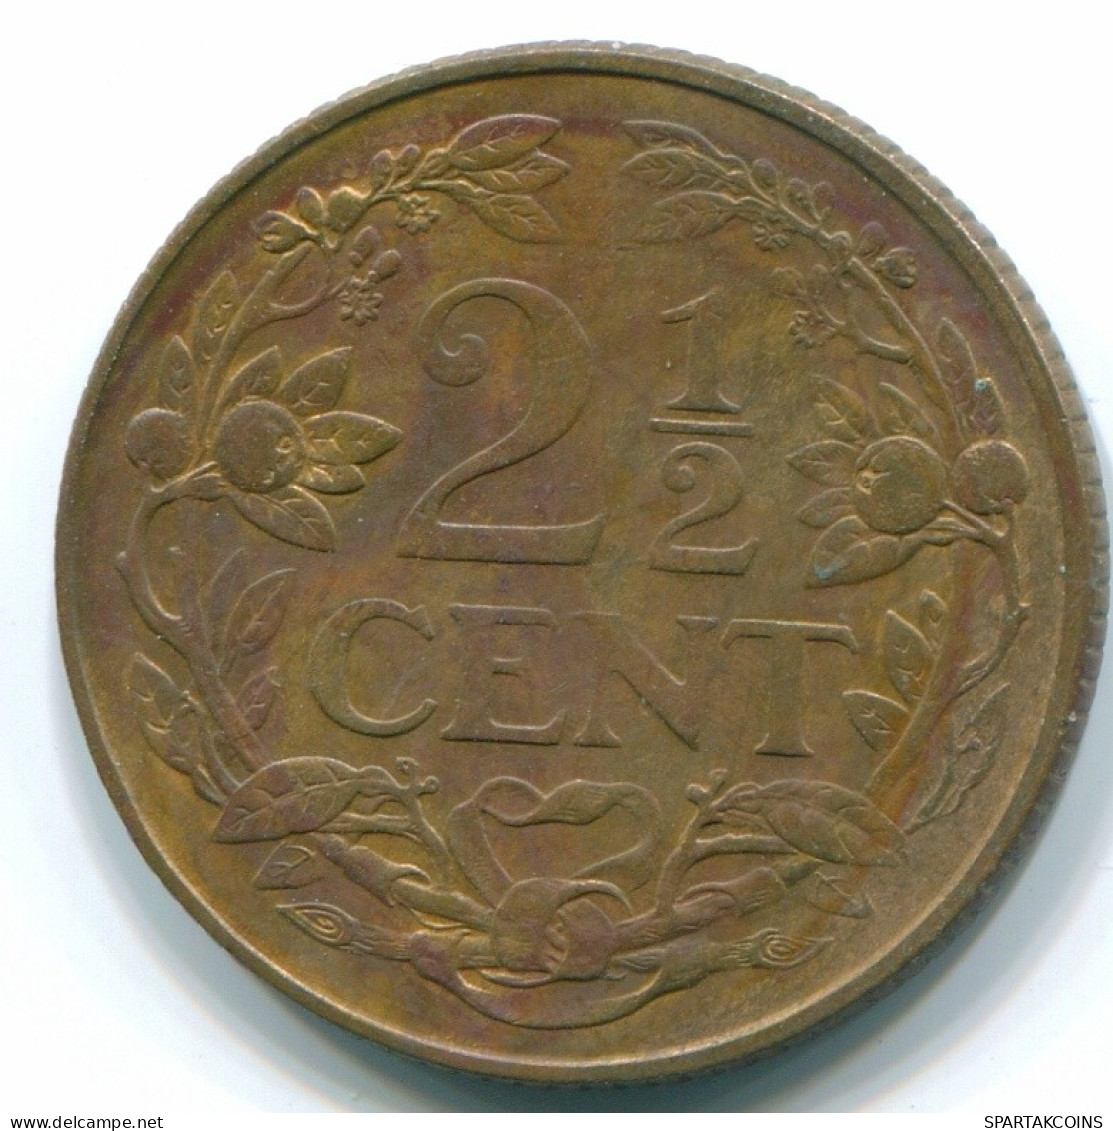 2 1/2 CENT 1965 CURACAO Netherlands Bronze Colonial Coin #S10225.U.A - Curacao